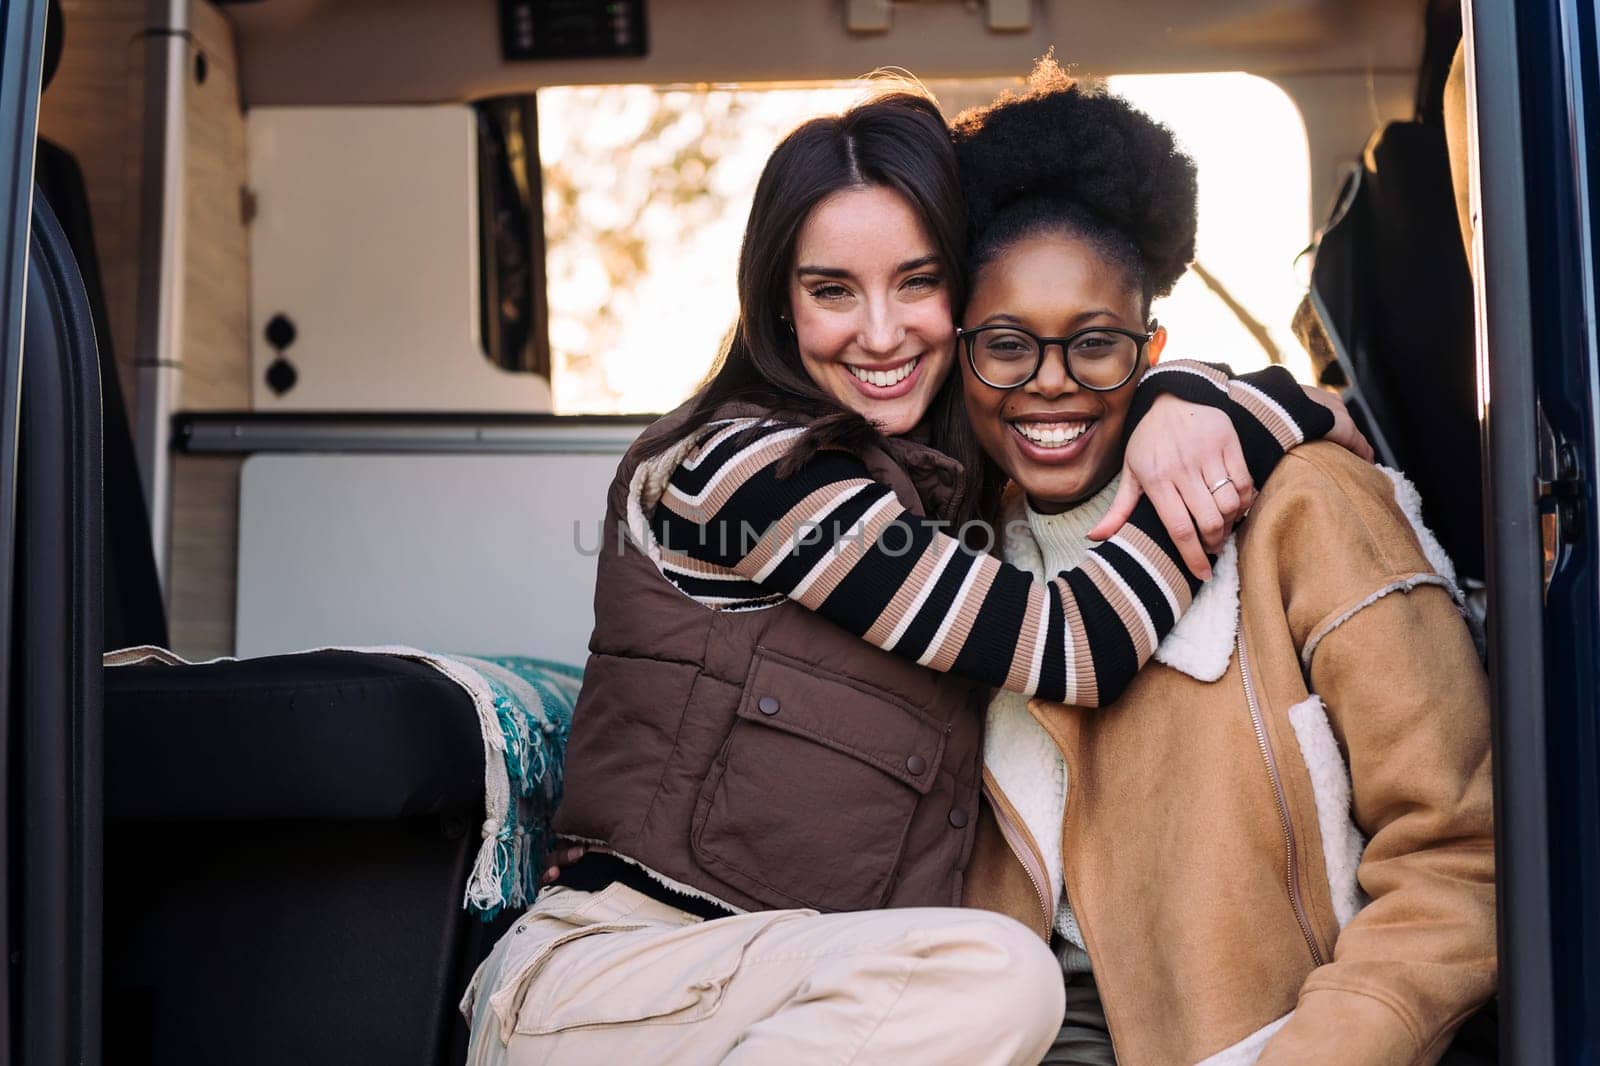 portrait of two happy women in a camper van embracing and smiling looking at camera, concept of weekend getaway and female friendship, copy space for text